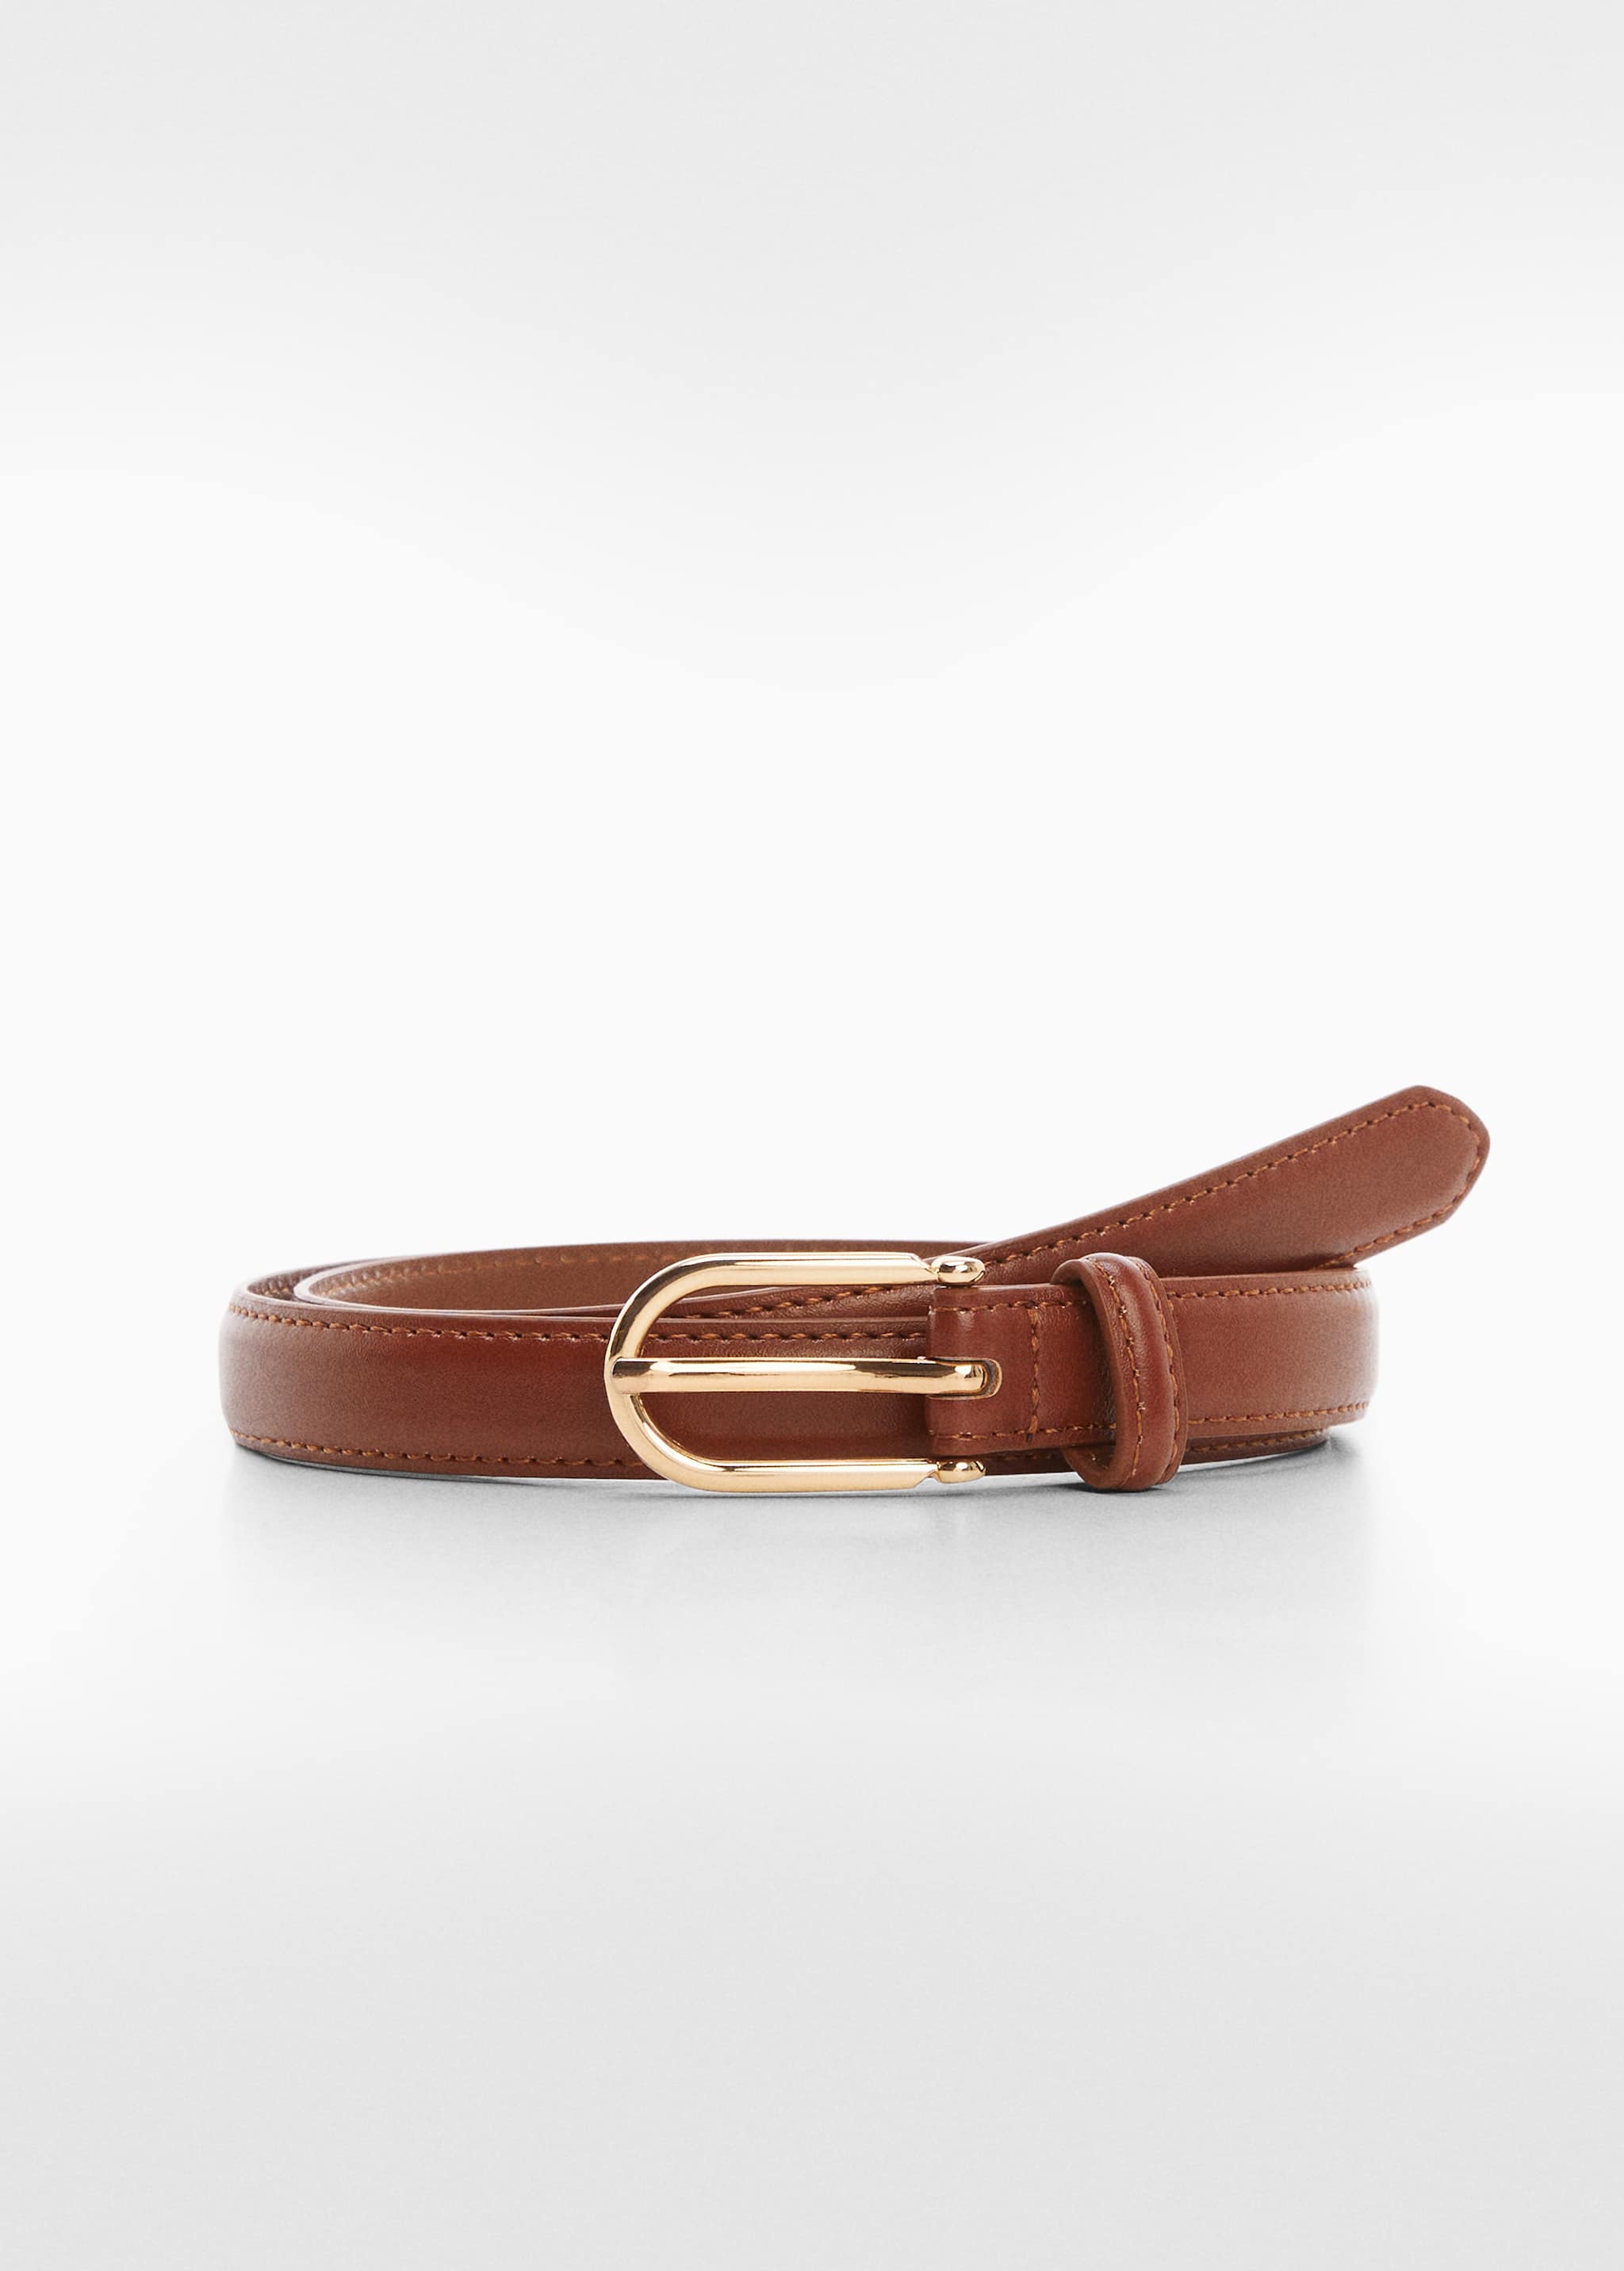 Buckle skinny belt - Article without model